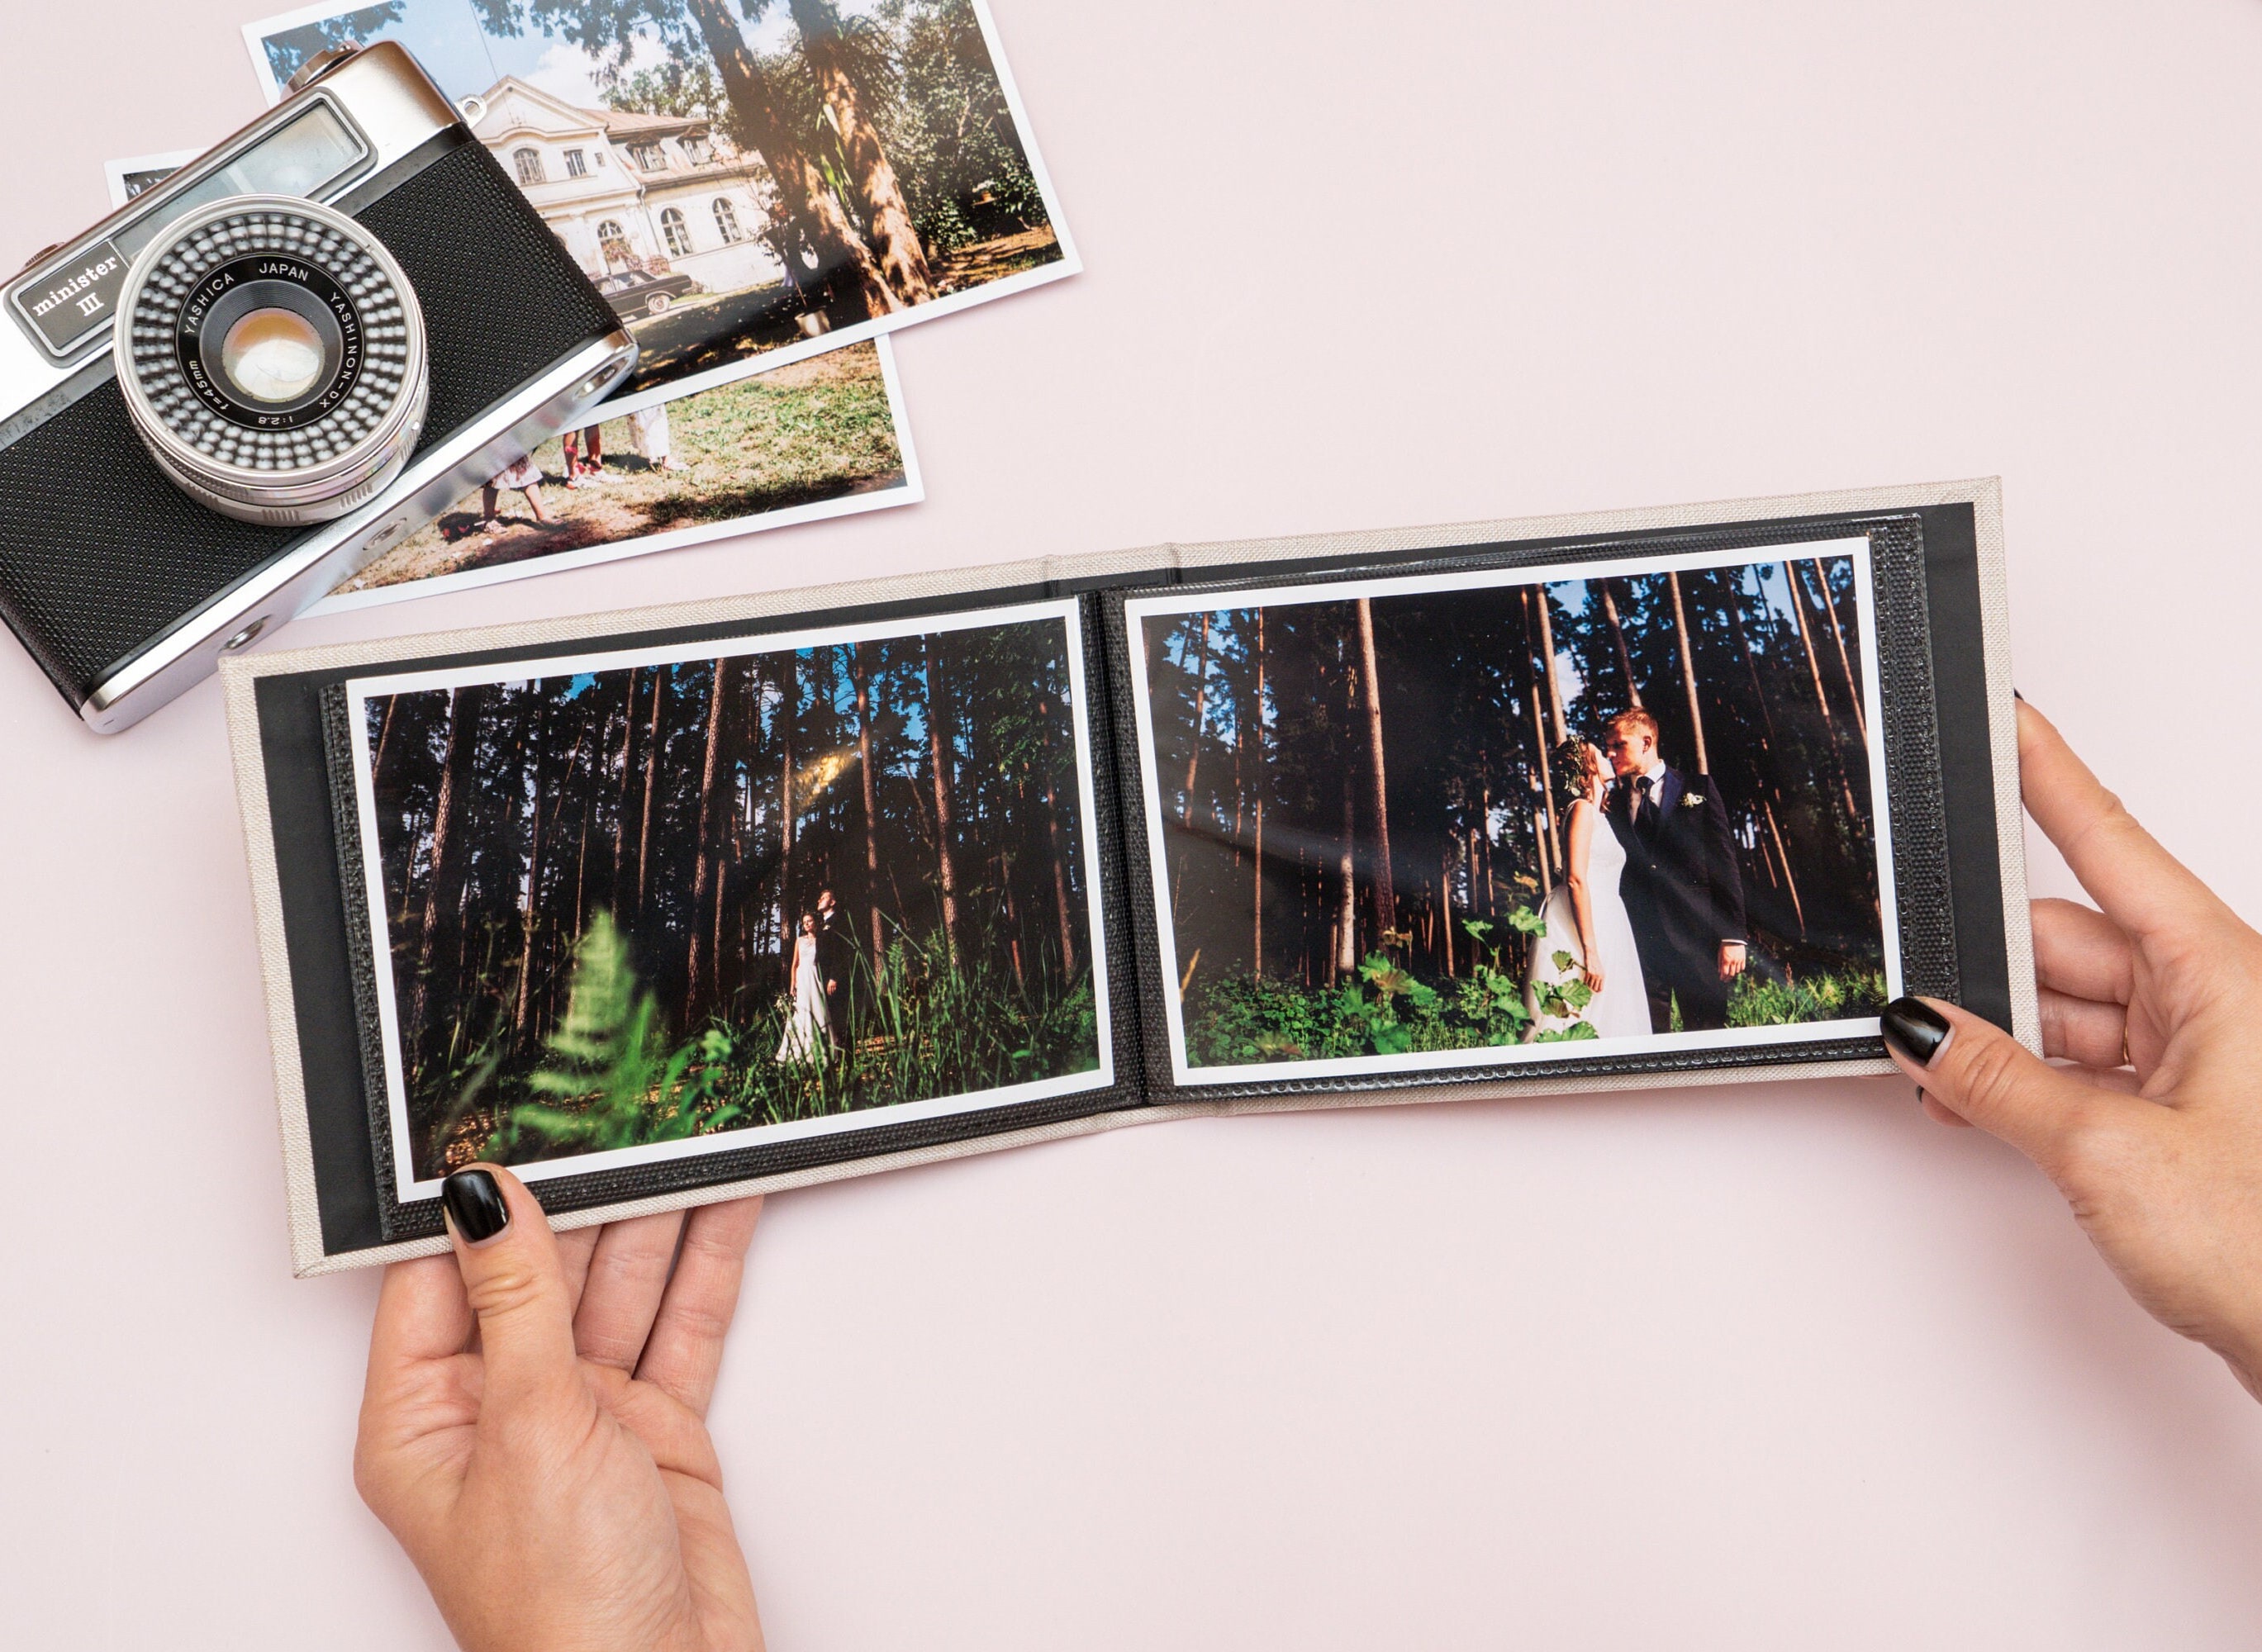 Personalized 4x6 Photo Album for 50, 100, 200 or 300 Photos